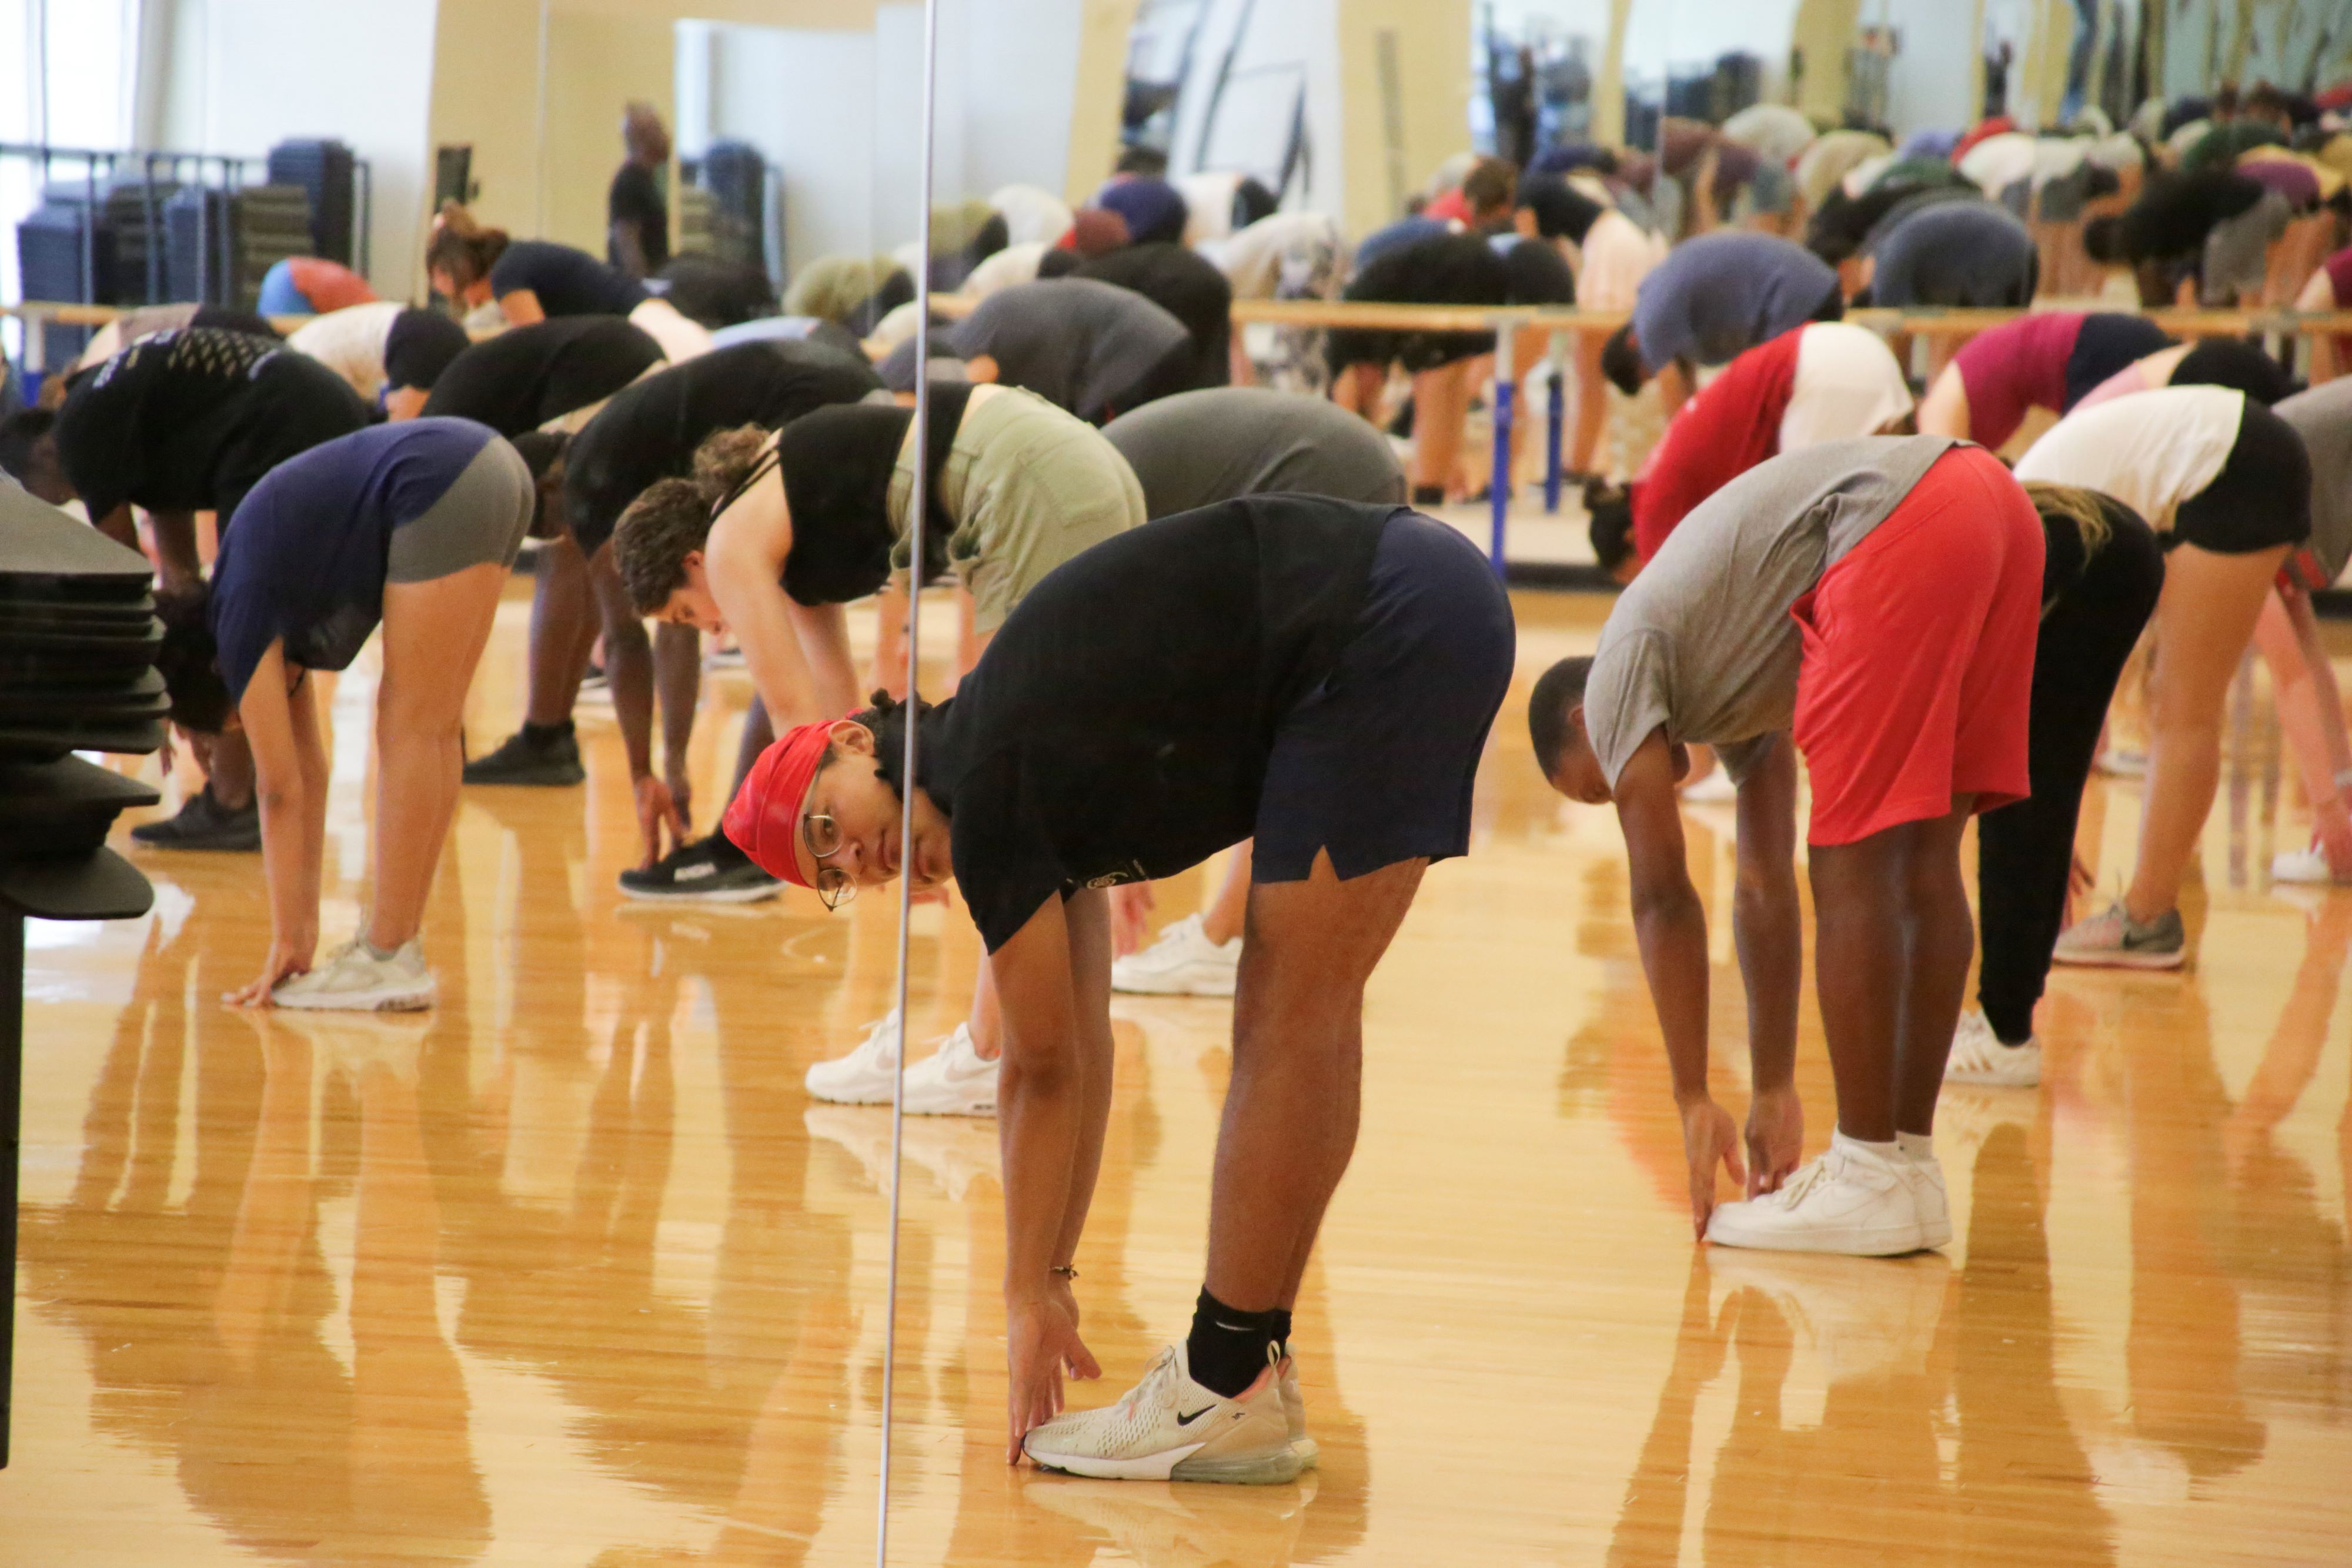 Participants stretching during a group fitness class